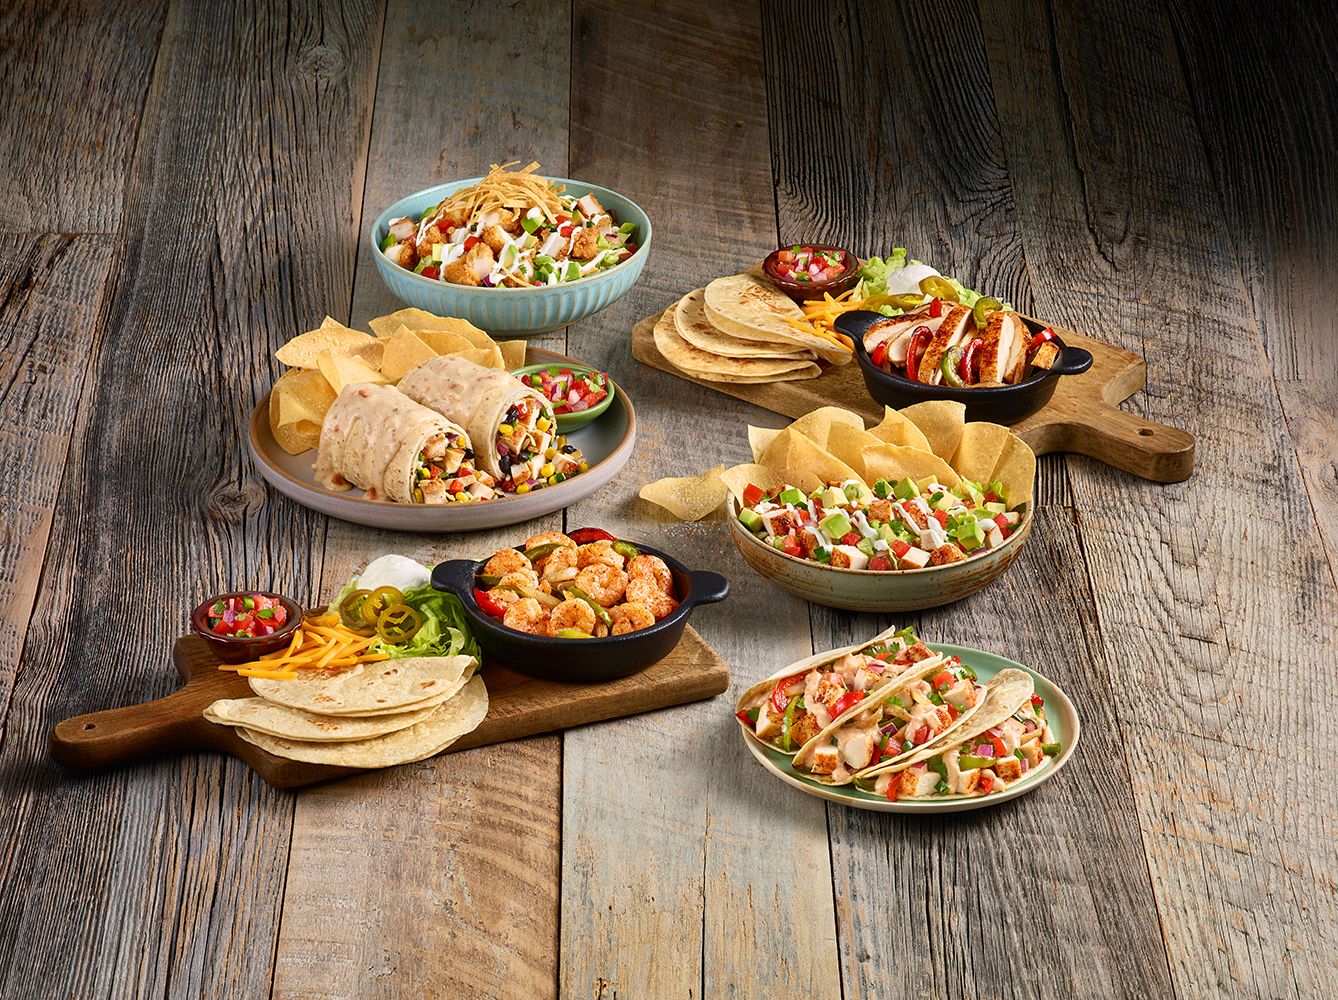 Ruby Tuesday Brings Back Sizzling Southwestern Favorites With Ruby's Freshmex Menu